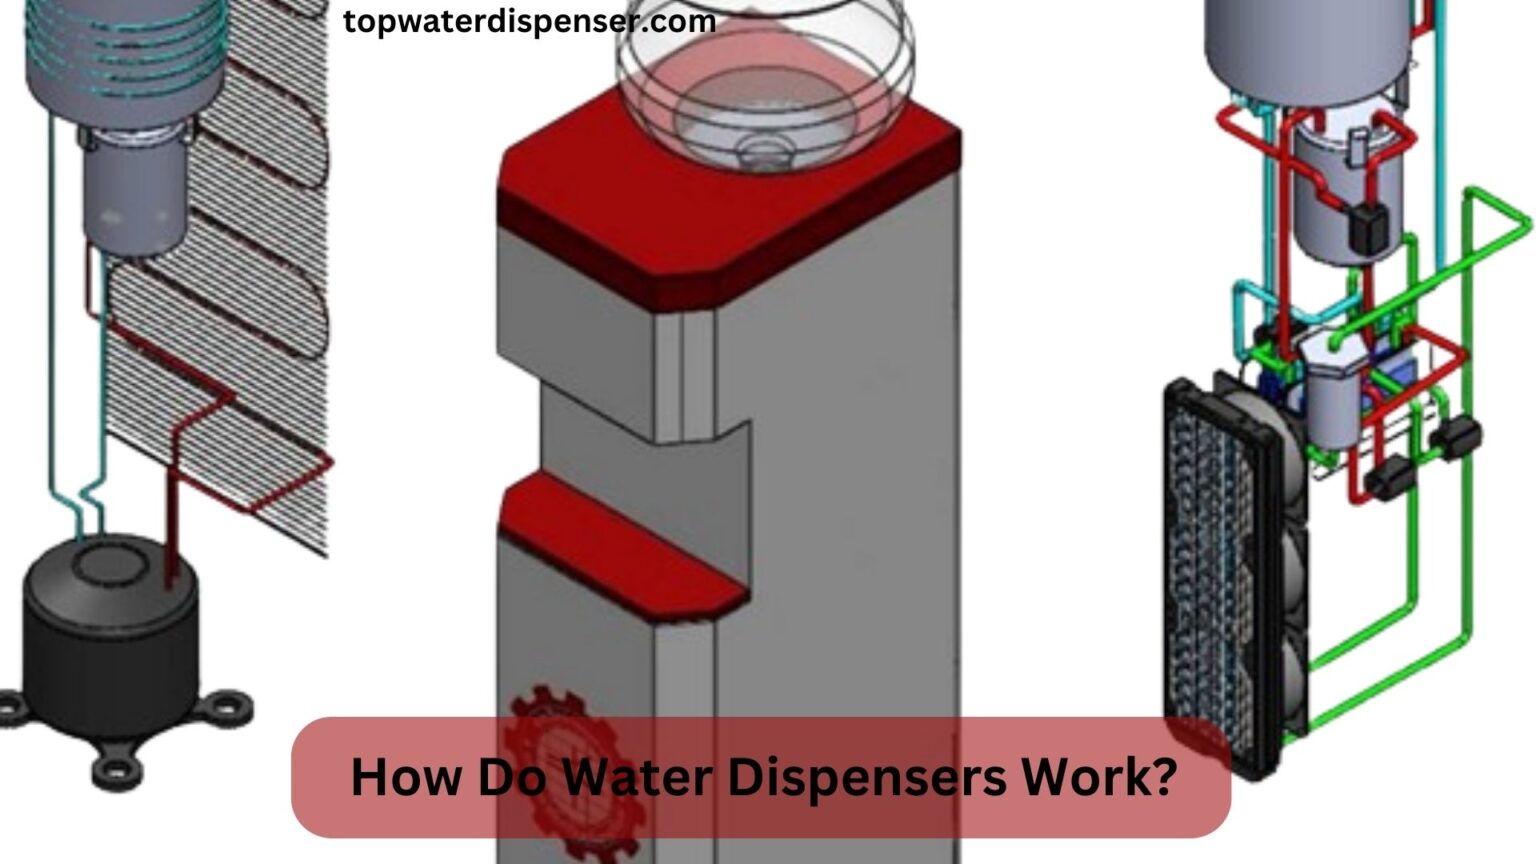 How Do Water Dispensers Work?